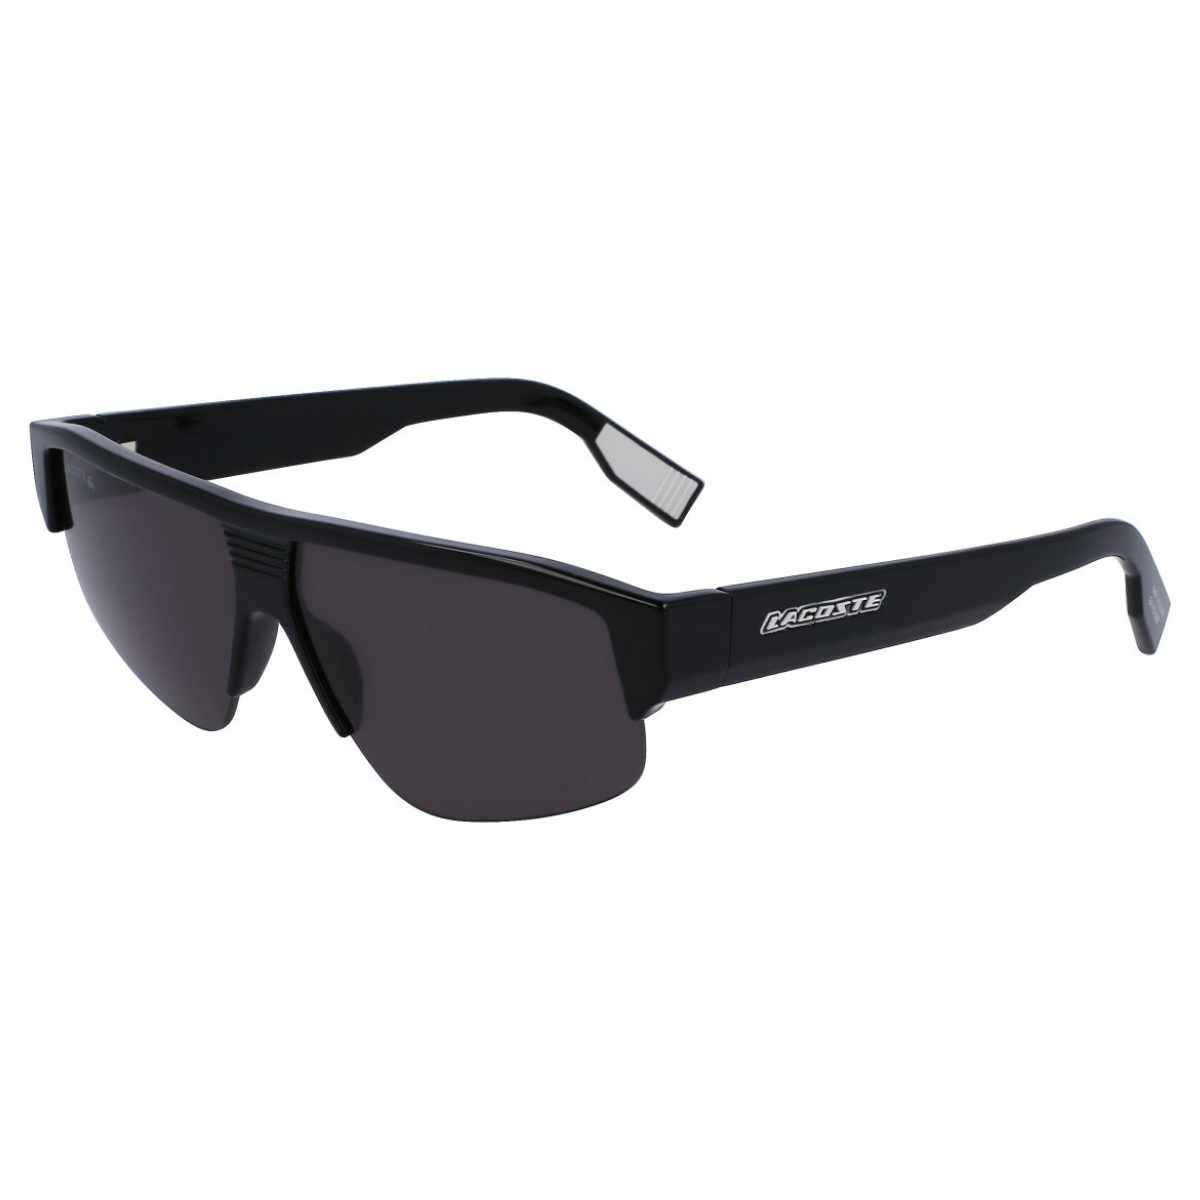 "Stylish Lacoste 6003 sunglasses for men and women. Aviator styles, top brands, and trendy designs in gold and black."